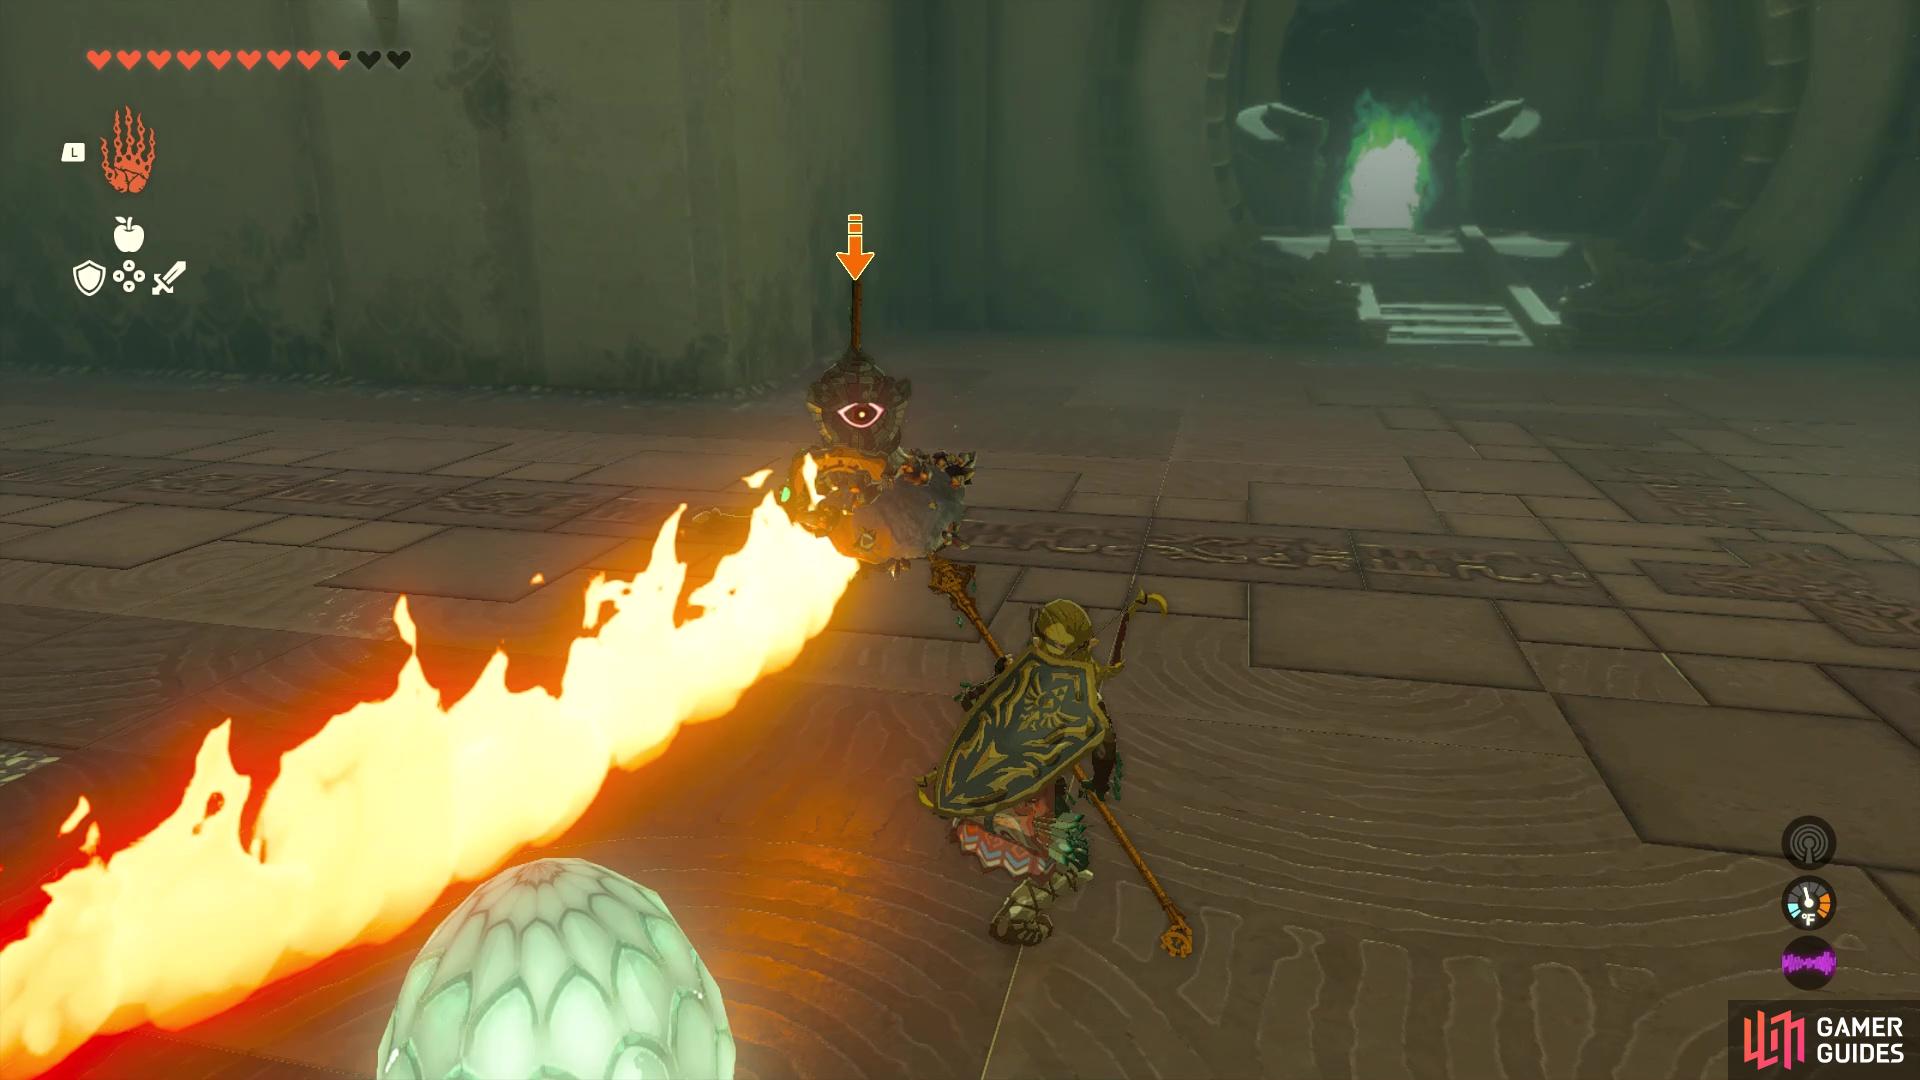 How To Beat Ijo-o Shrine In The Legend Of Zelda: Tears Of The Kingdom